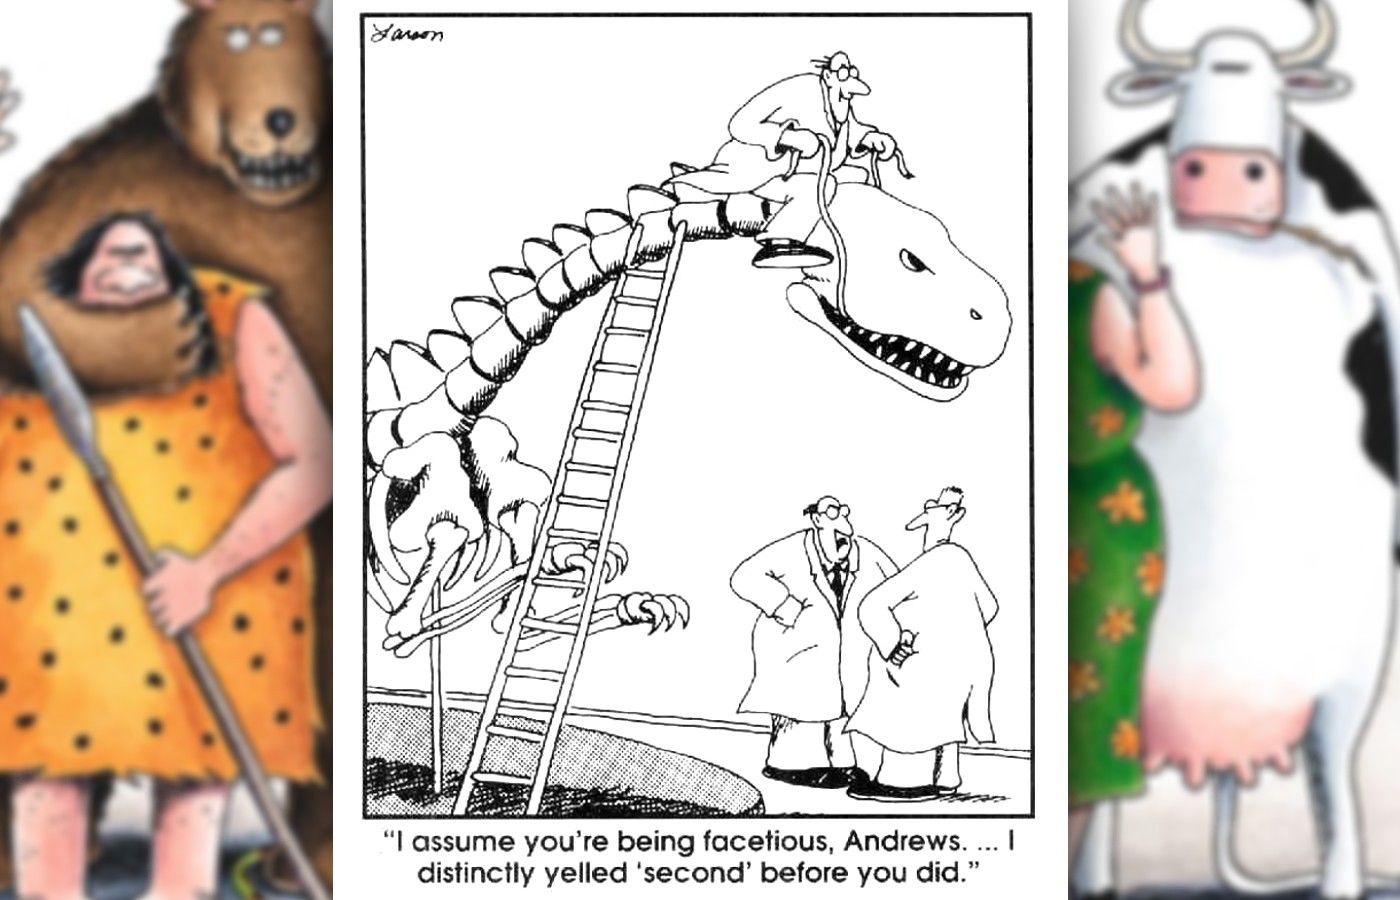 far side comic where a scientist is riding a fossil